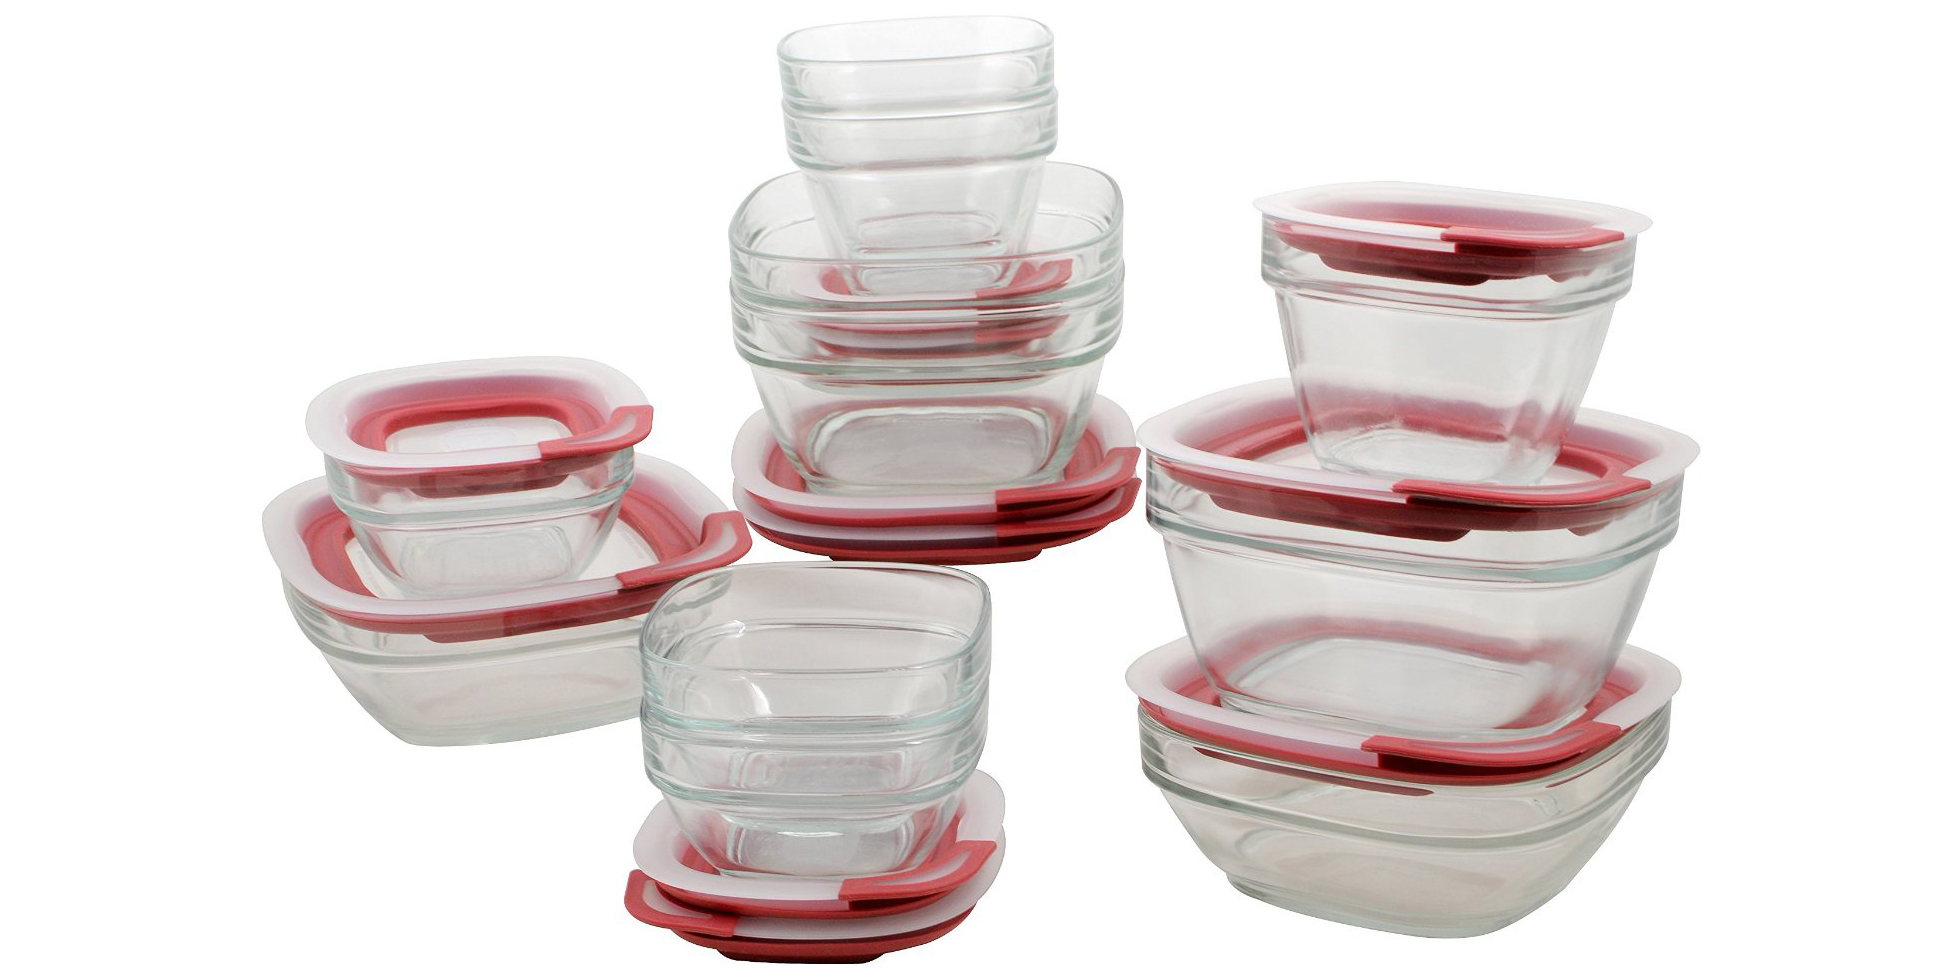 https://9to5toys.com/wp-content/uploads/sites/5/2016/04/rubbermaid-glass-set.jpg